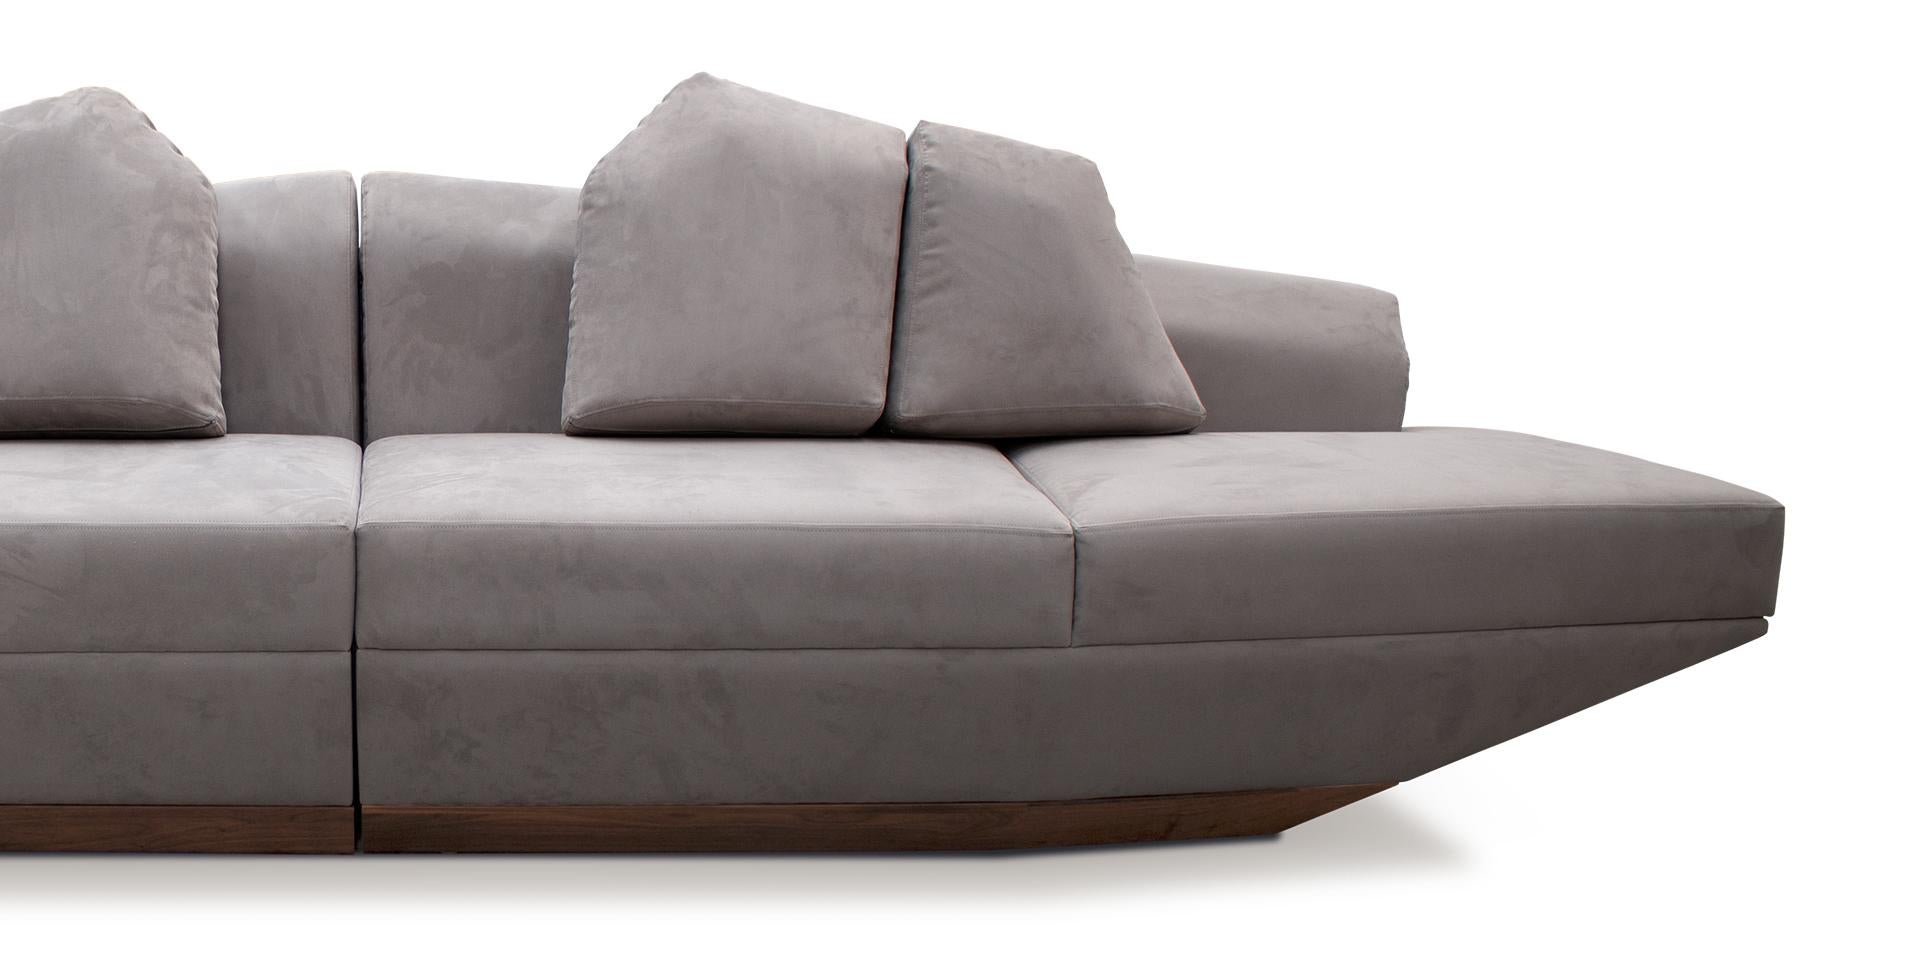 With a vision to understand the past and interpret it through the colors, the materials and contemporary design, ALMA de LUCE®, create this emotionally sofa passionately inspired by the iconic city Guadames, a world heritage.

This contemporary